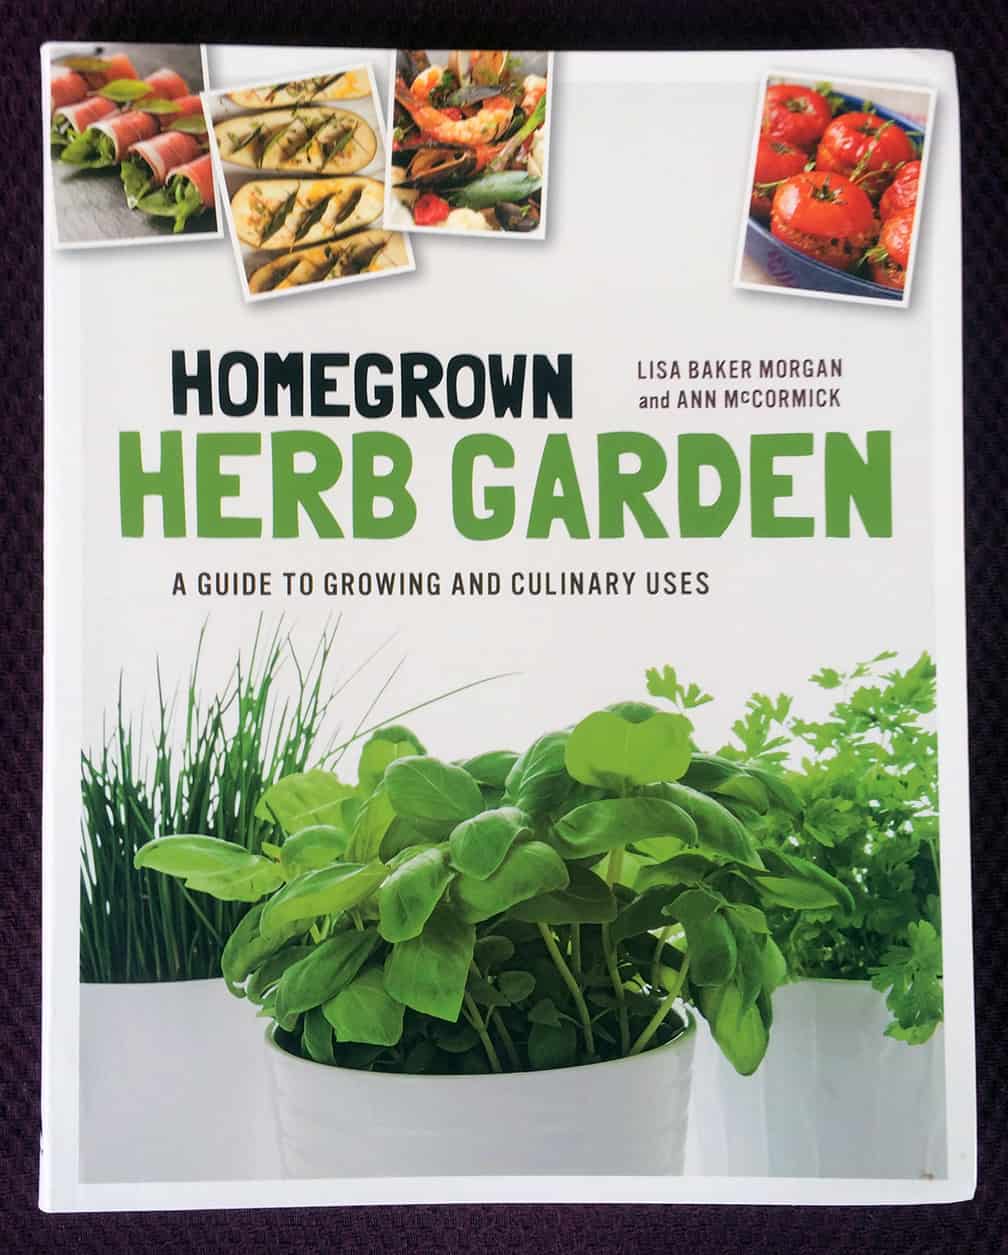 A fun read that will have you heading for your garden and kitchen, smiling all the way.